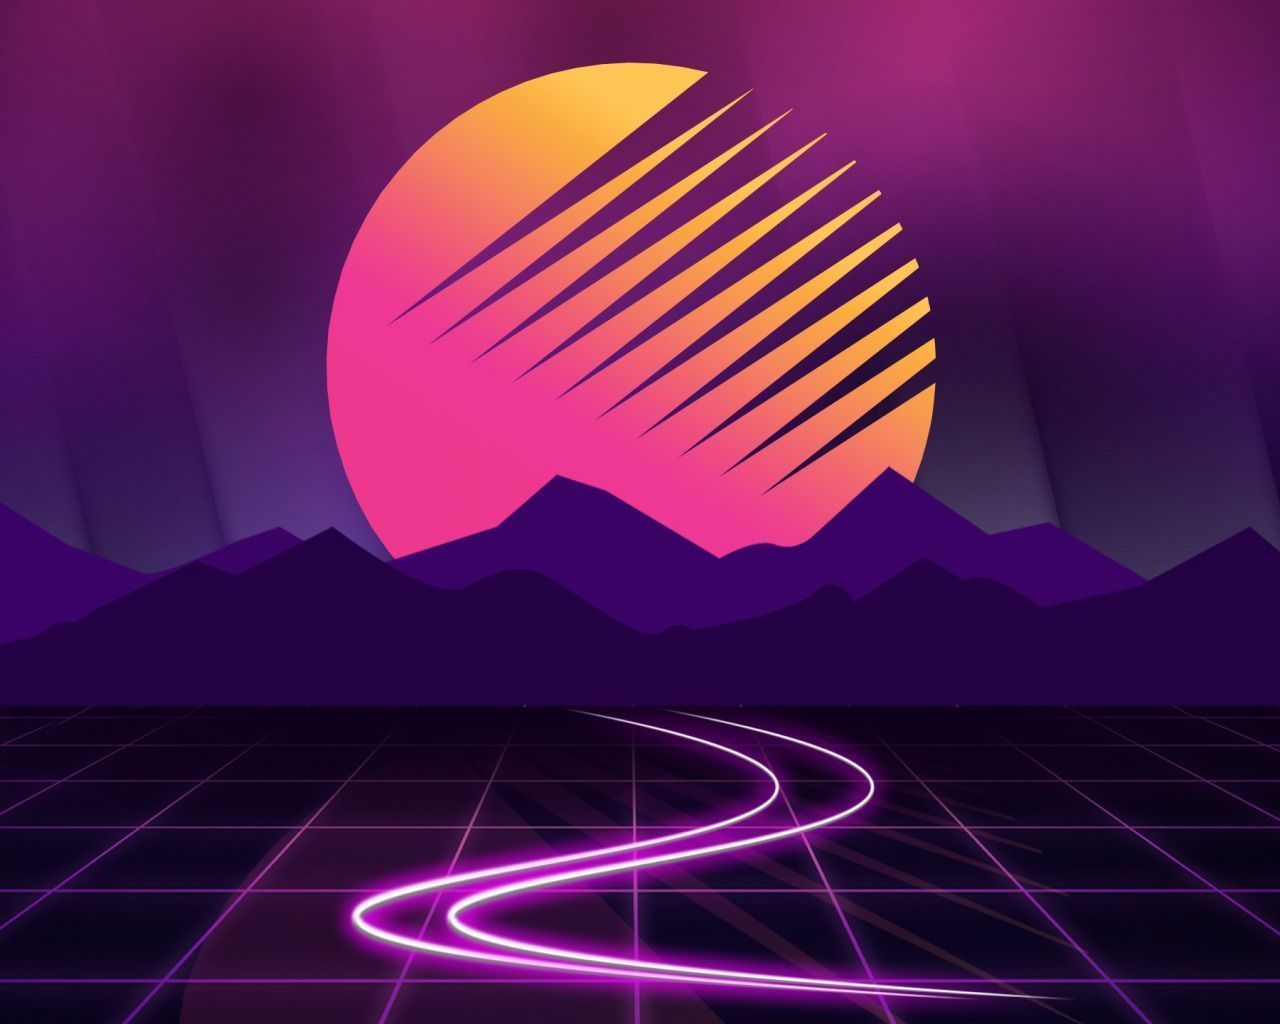 A purple and pink sunset with neon lines - 1280x1024